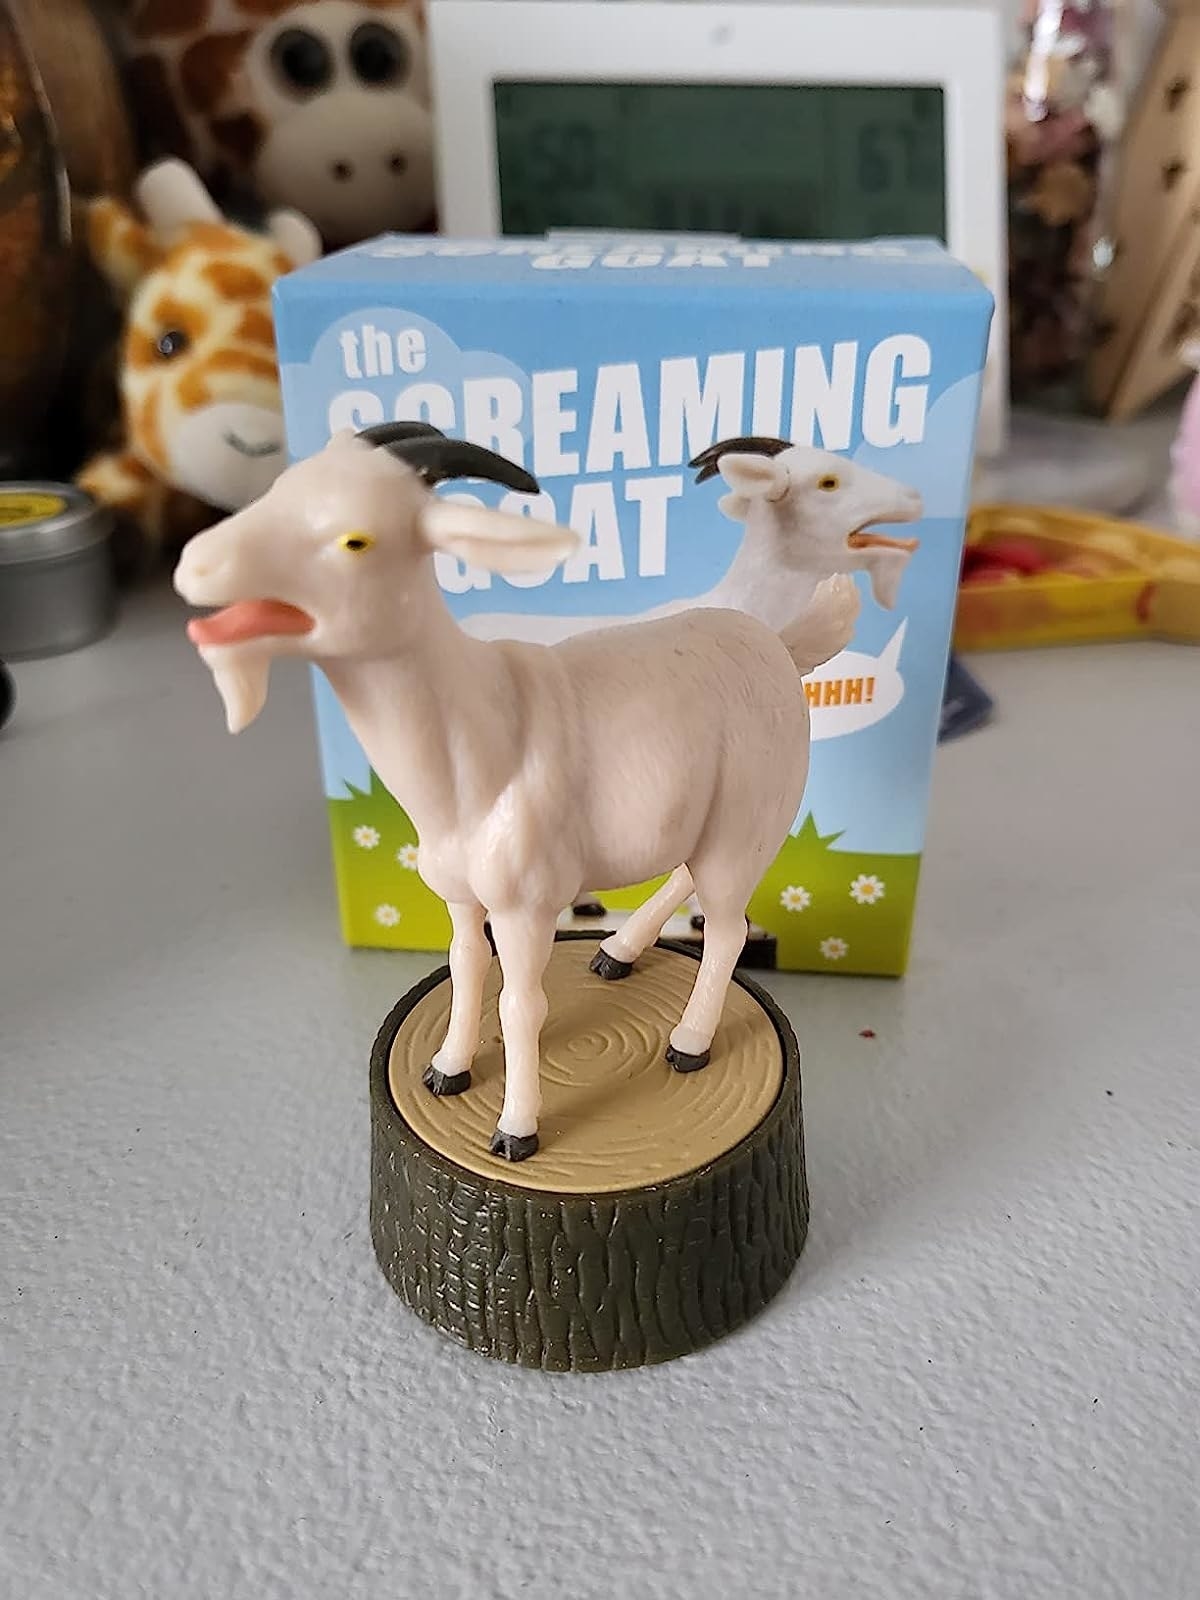 Review photo of the figurine and book